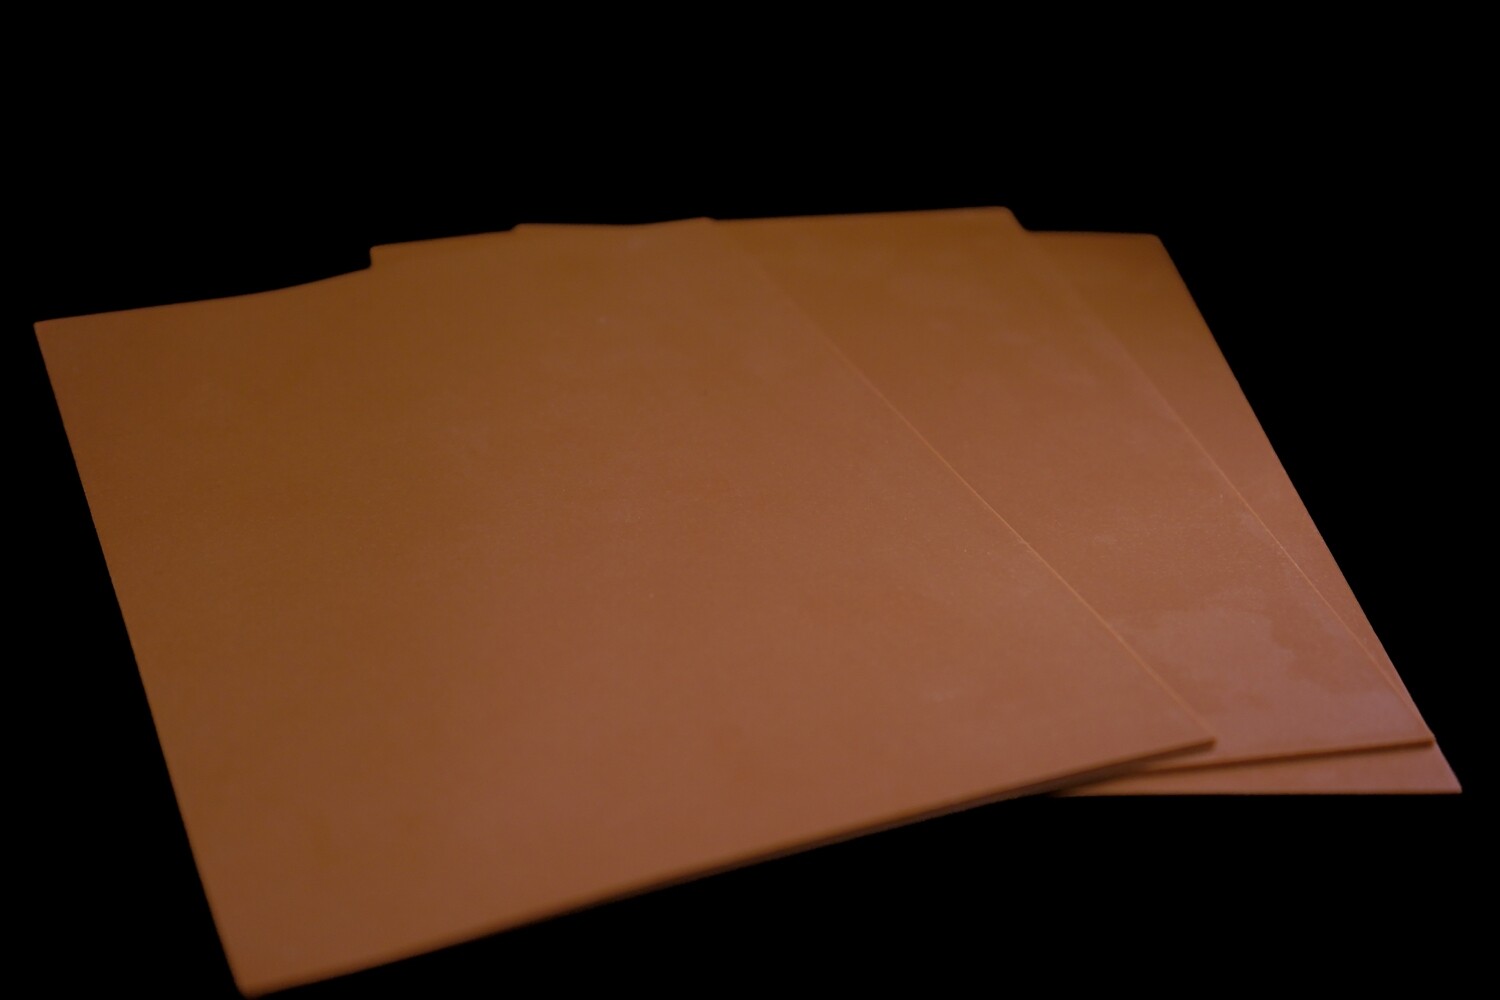 3 x A5 Reelskin sheet (Darker tone) £19.99 (discount codes not applicable to this offer)